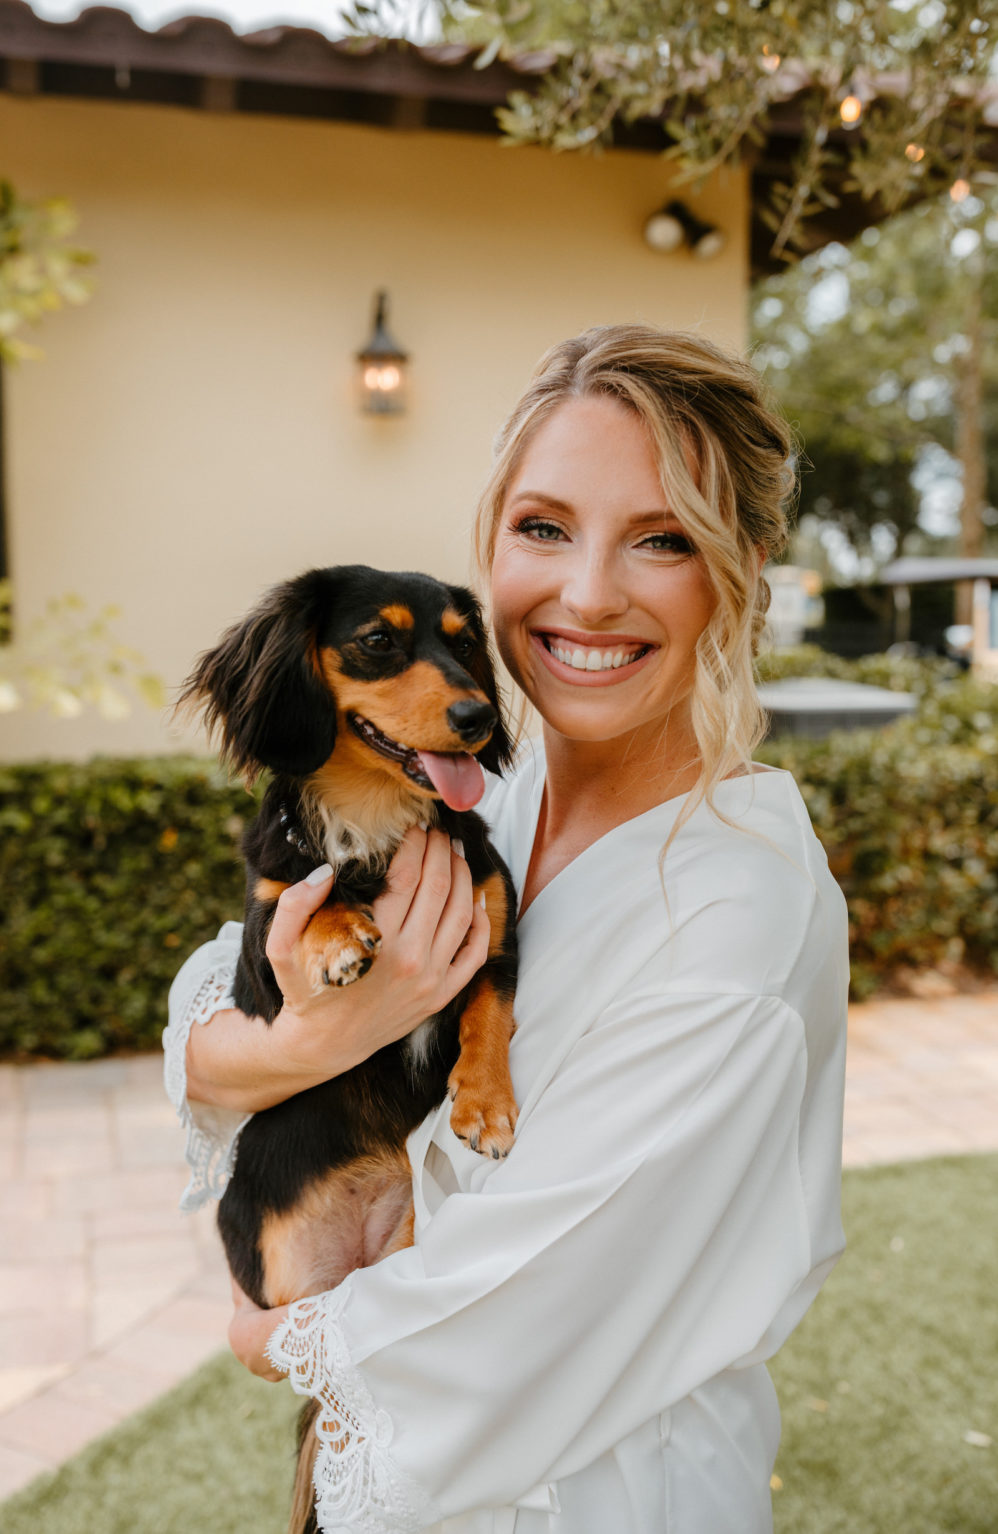 Bride and Her Dog Getting Ready On Wedding Day Portrait | Pets On Your Wedding Day | Bride and Dachshund